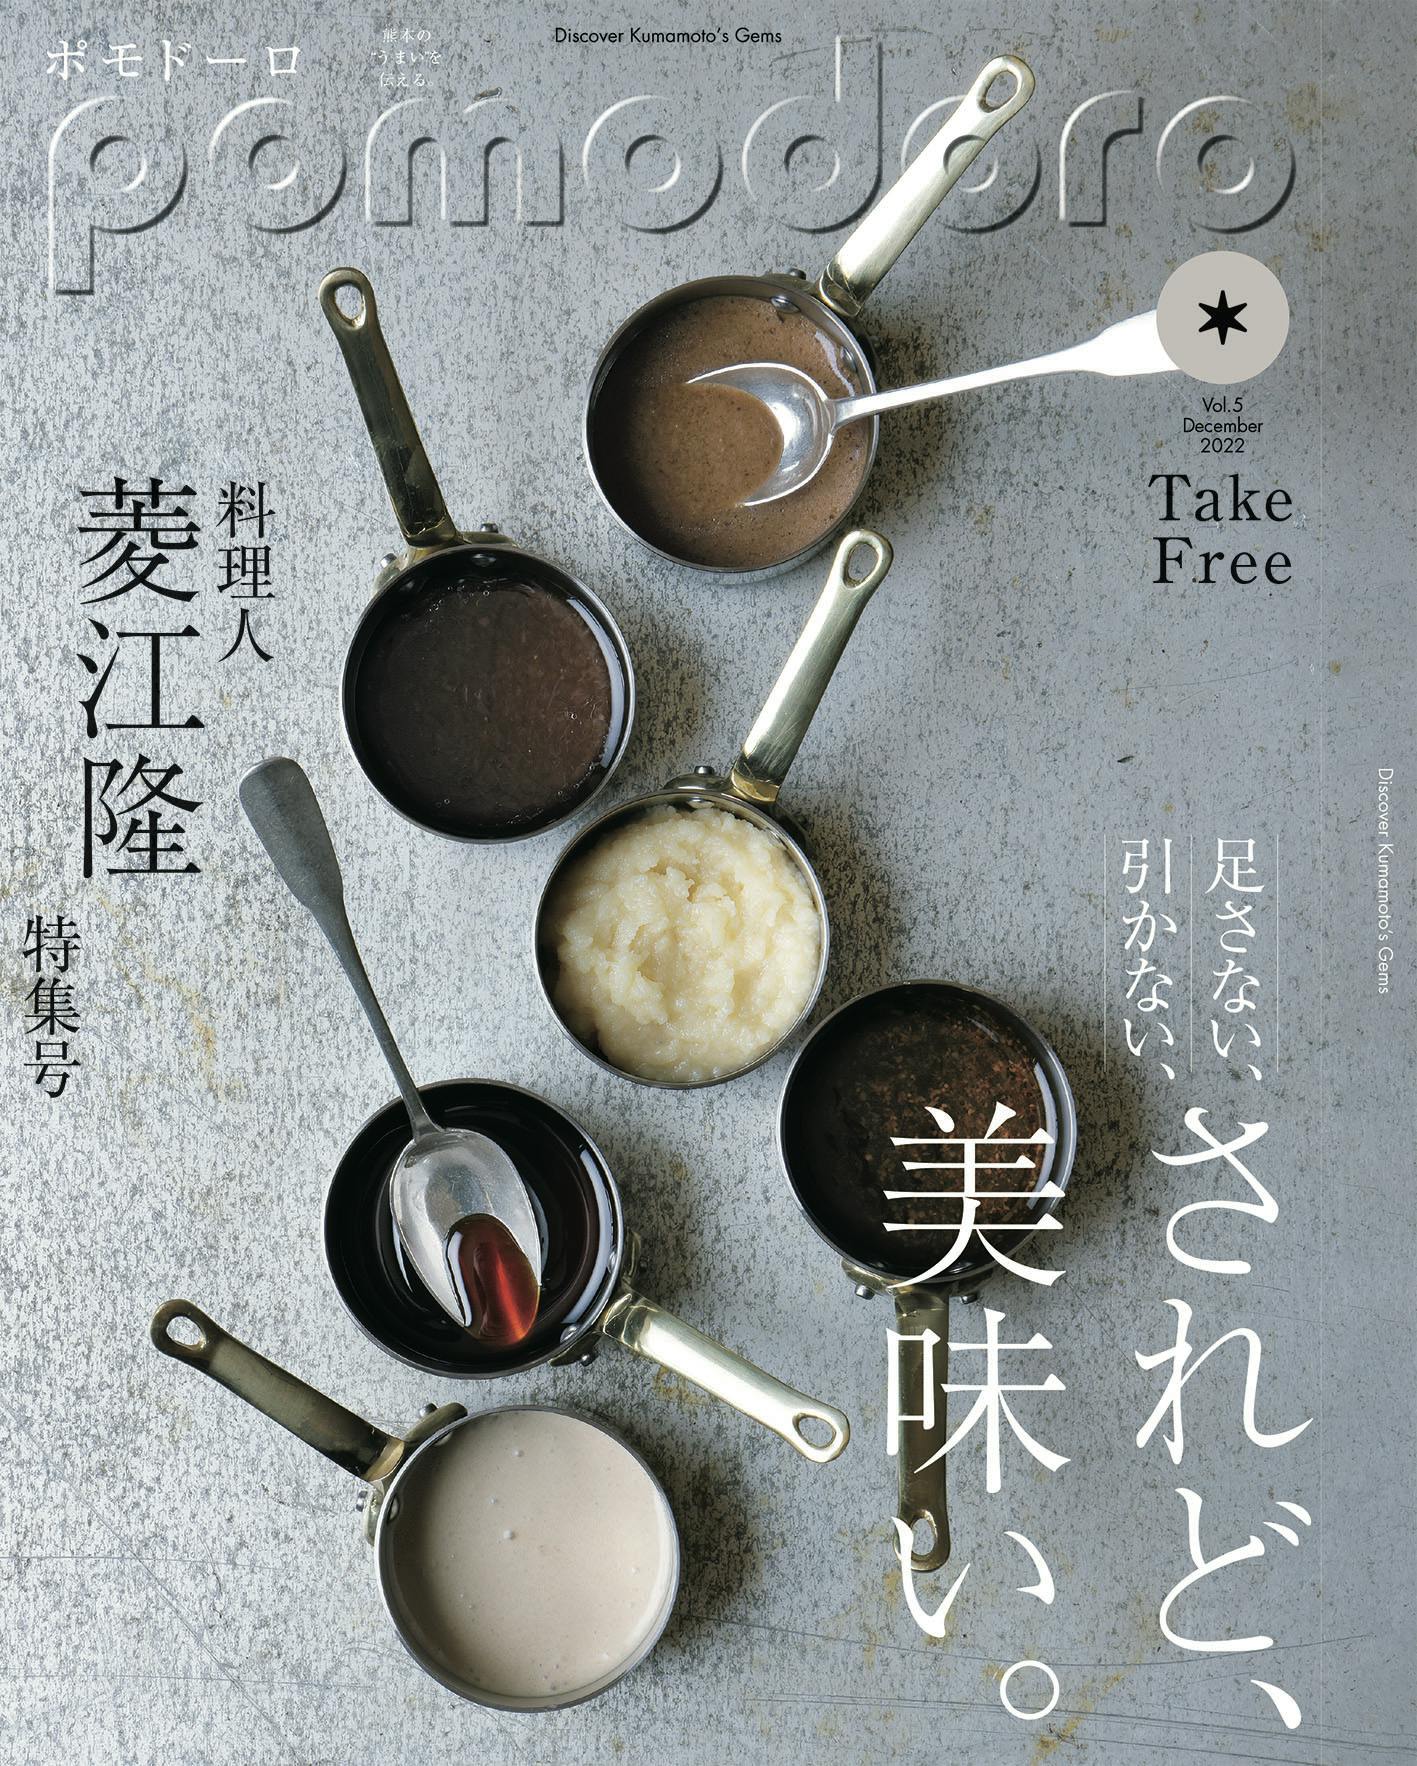 The 5th issue of “pomodoro”, a free magazine that conveys the “deliciousness” of Kumamoto, has been published!